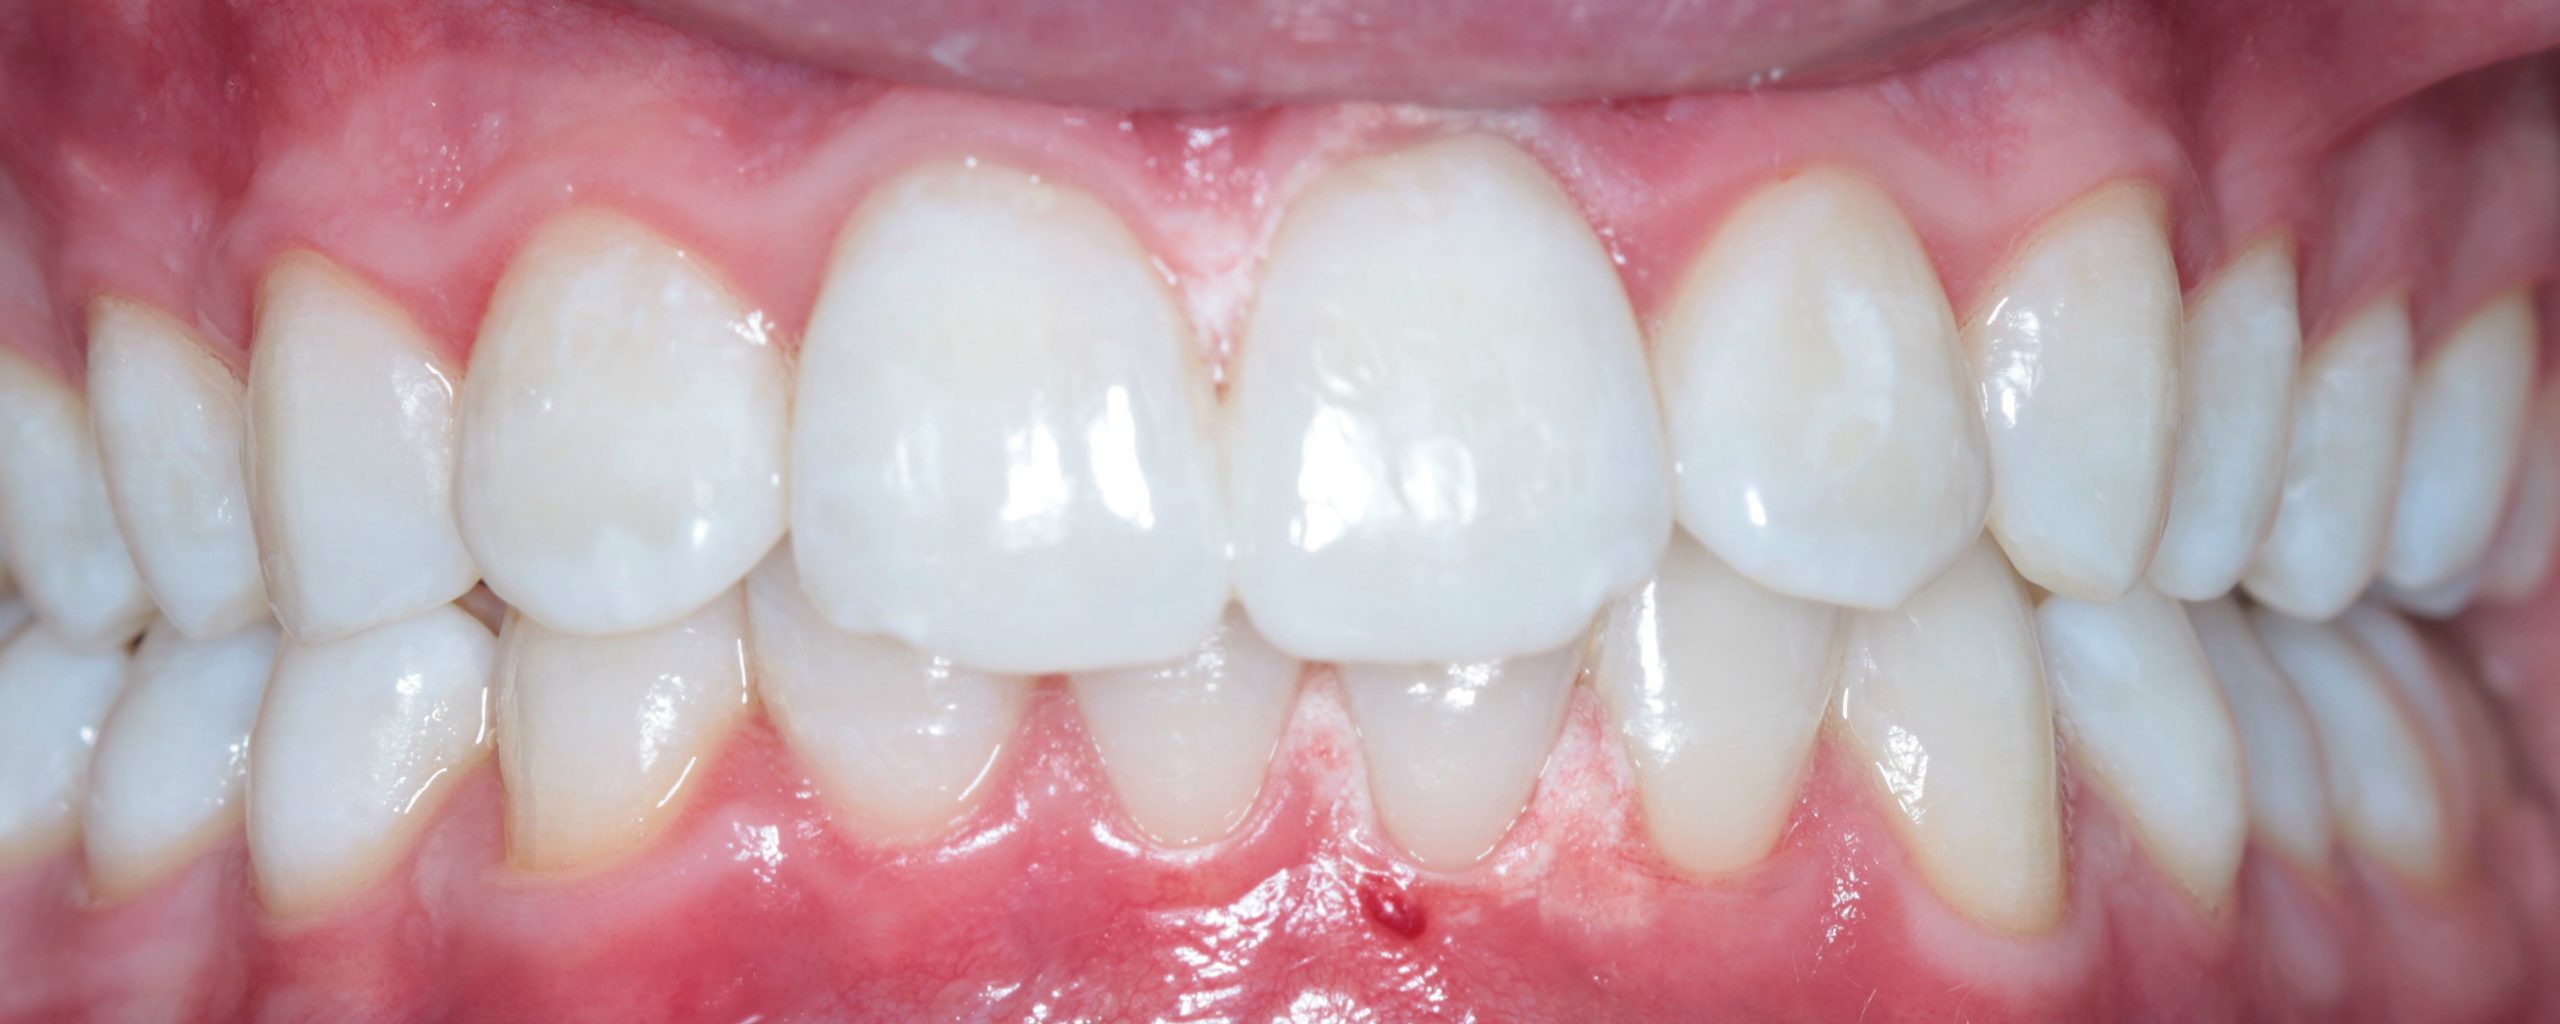 Whitening Case 4 After Scaled